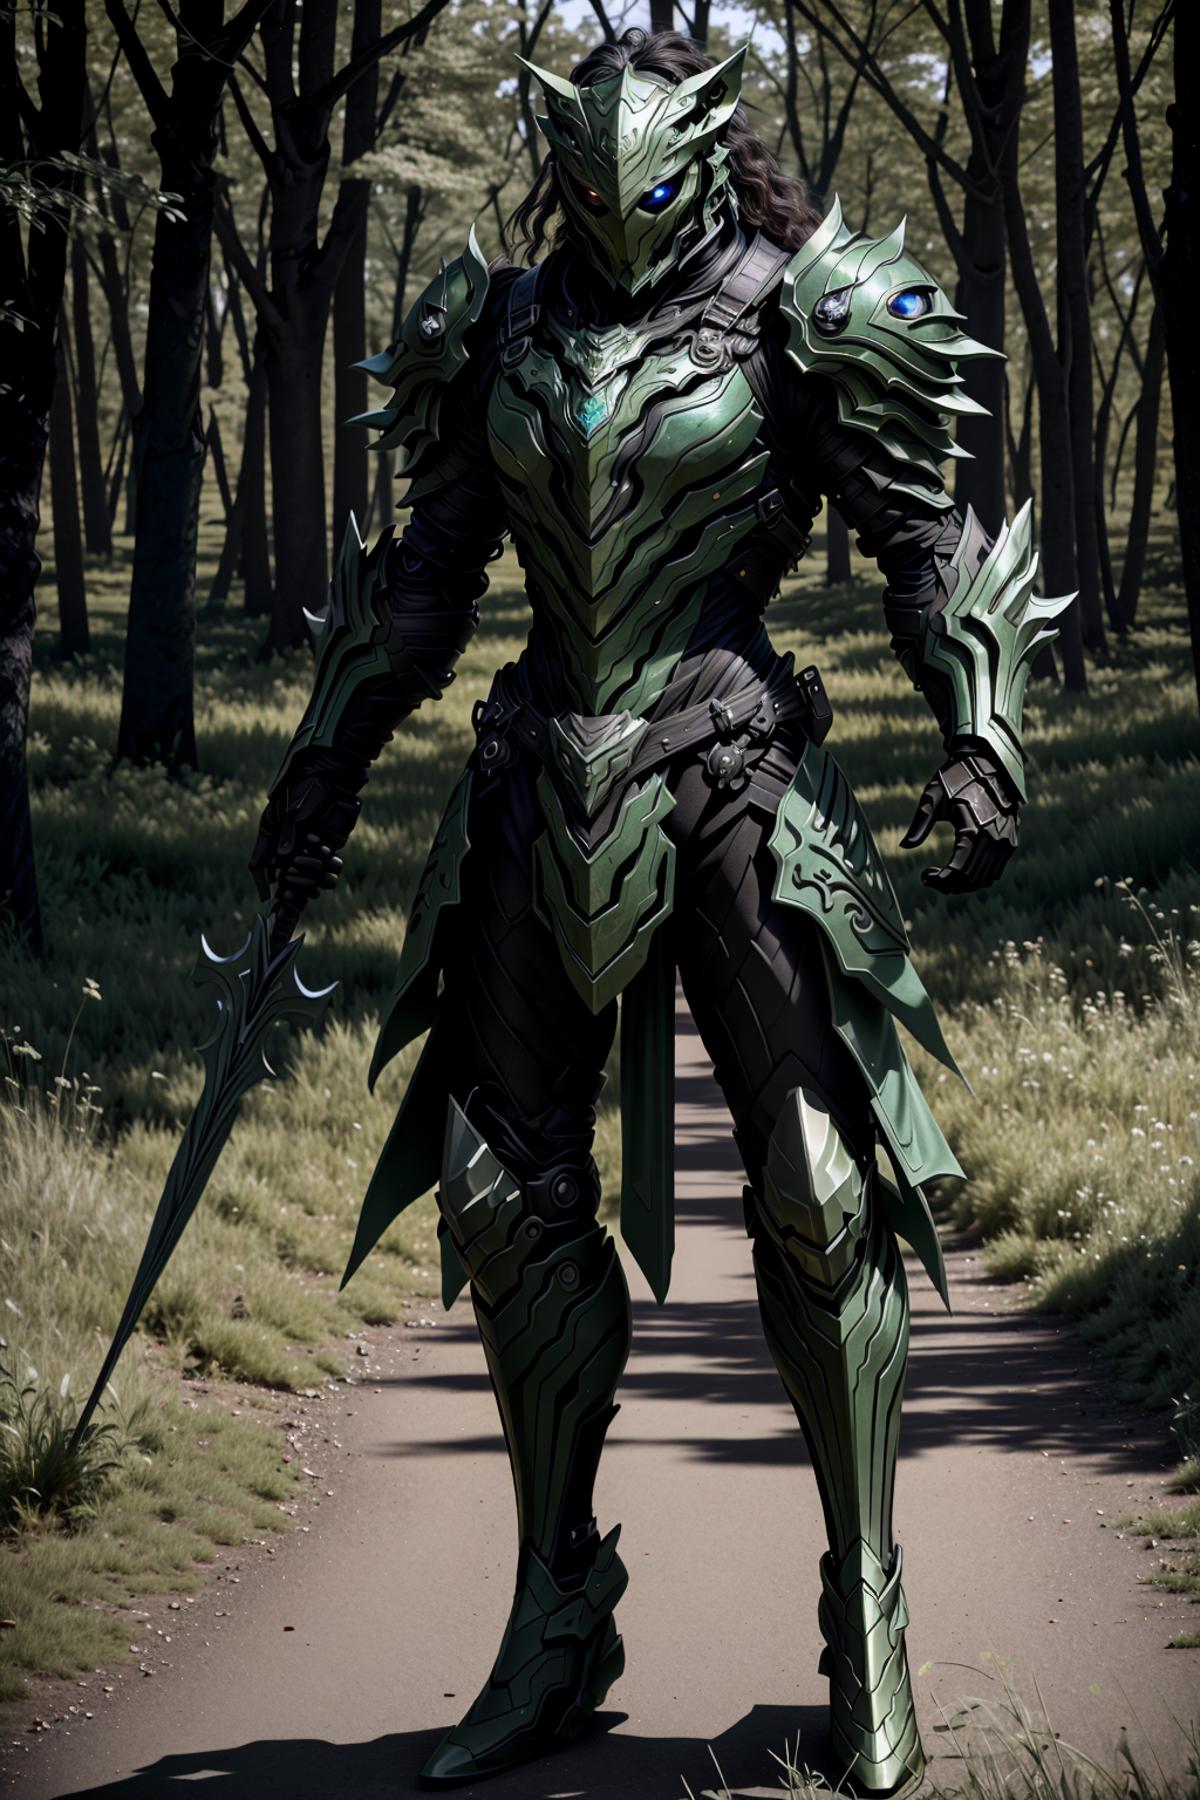 Armor from HaDeS image by DeViLDoNia